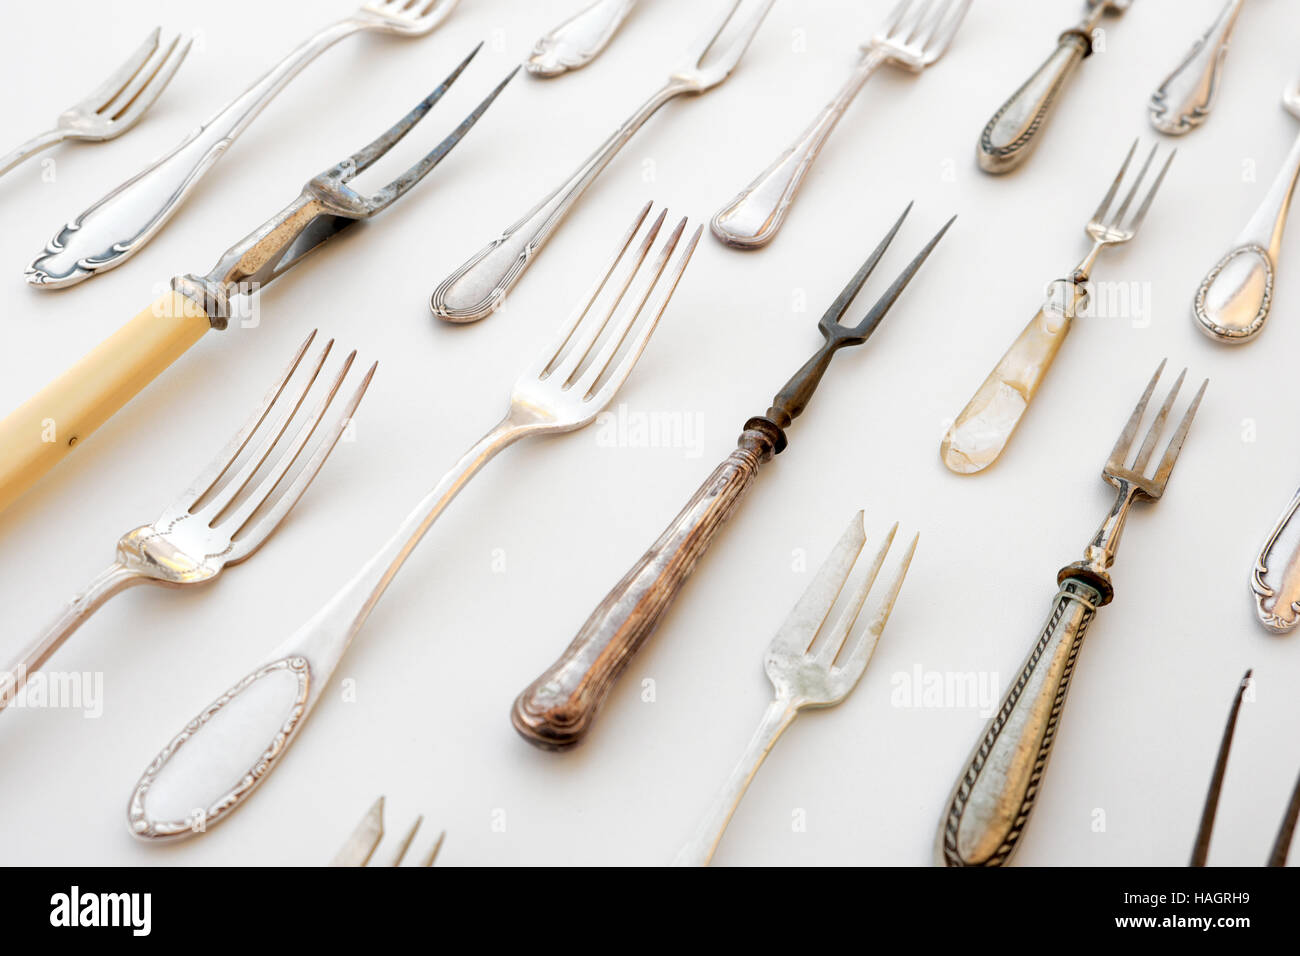 knife and fork pattern - vintage beautiful flatware, silver cutlery Stock Photo